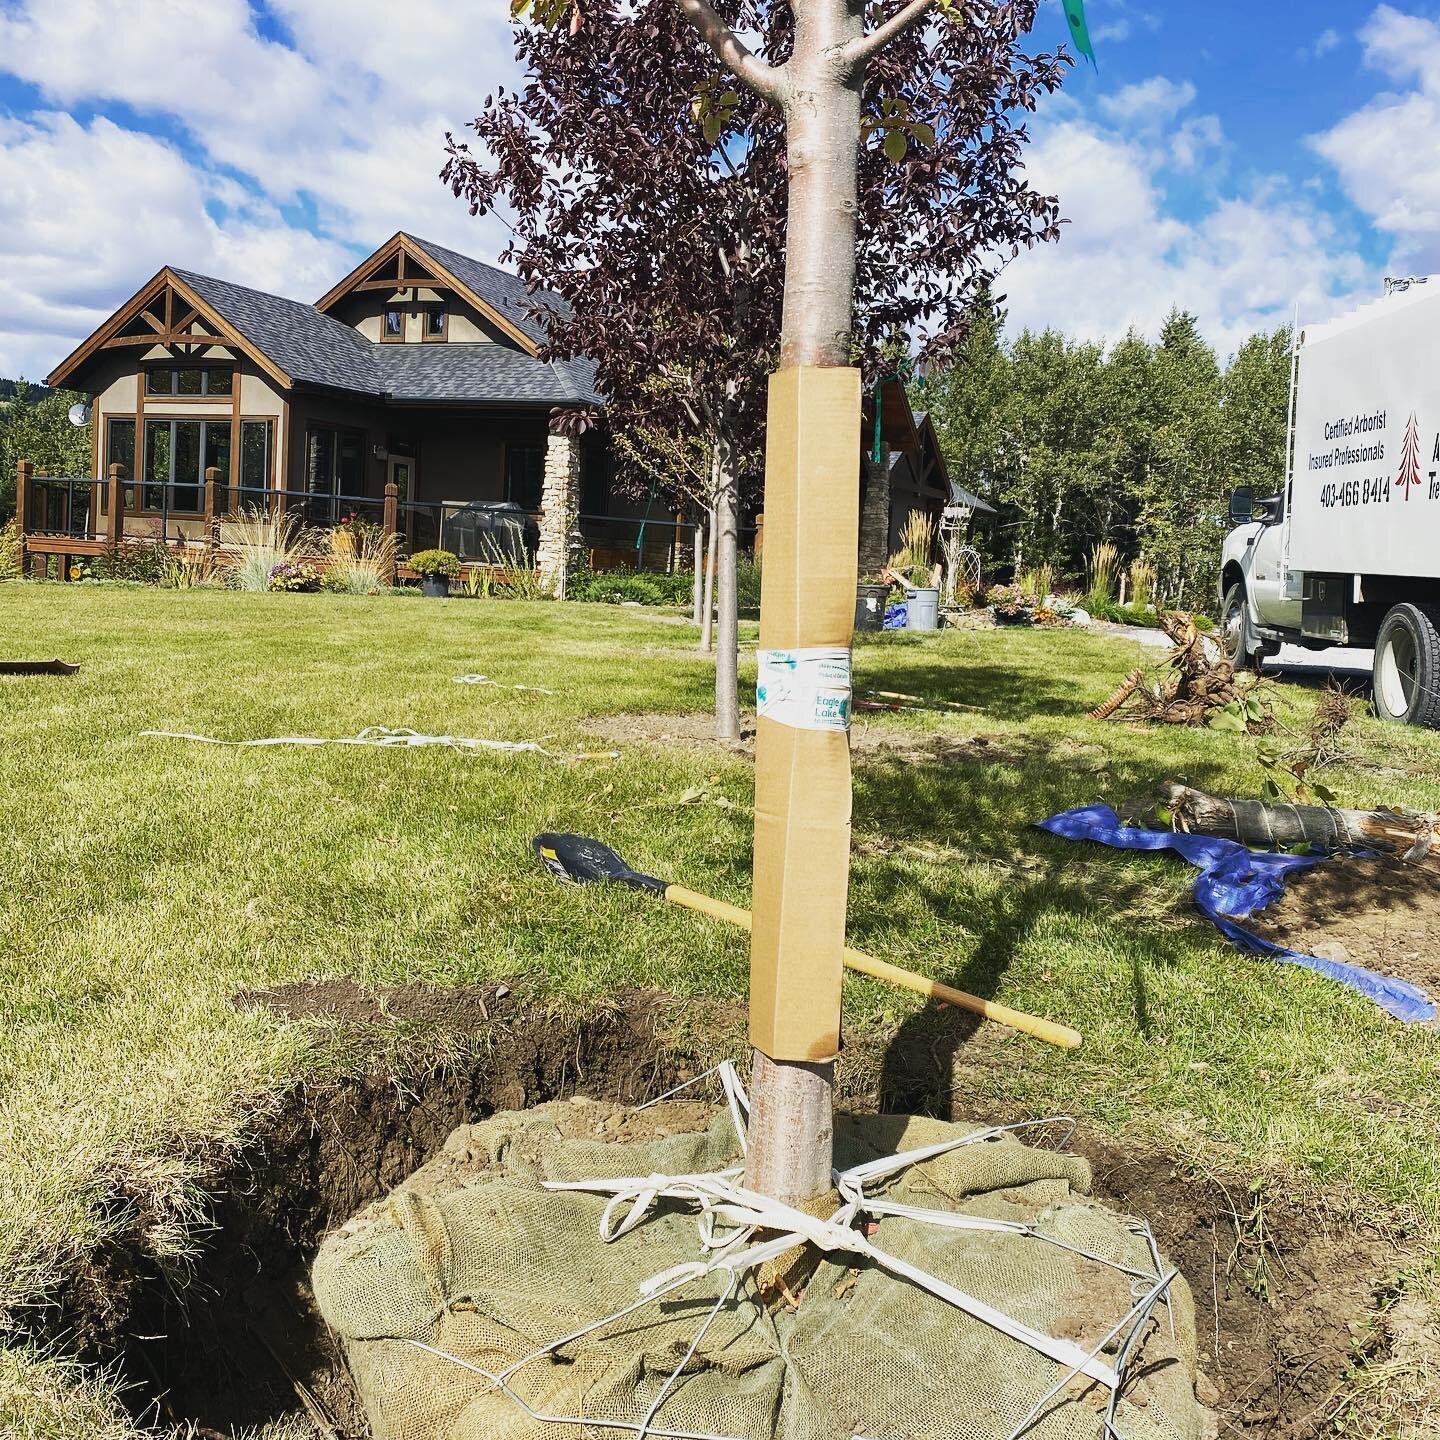 Awesome day to plant some trees near Cochrane today. These beauties came from @eaglelakenurseries. 

Call us for a free quote. 

#cochrane
#treeplanting
#arborist
#isacertifiedarborist 
#goodkarma
#treehugger
#landscaping 
#dontforgettocutthebasketou